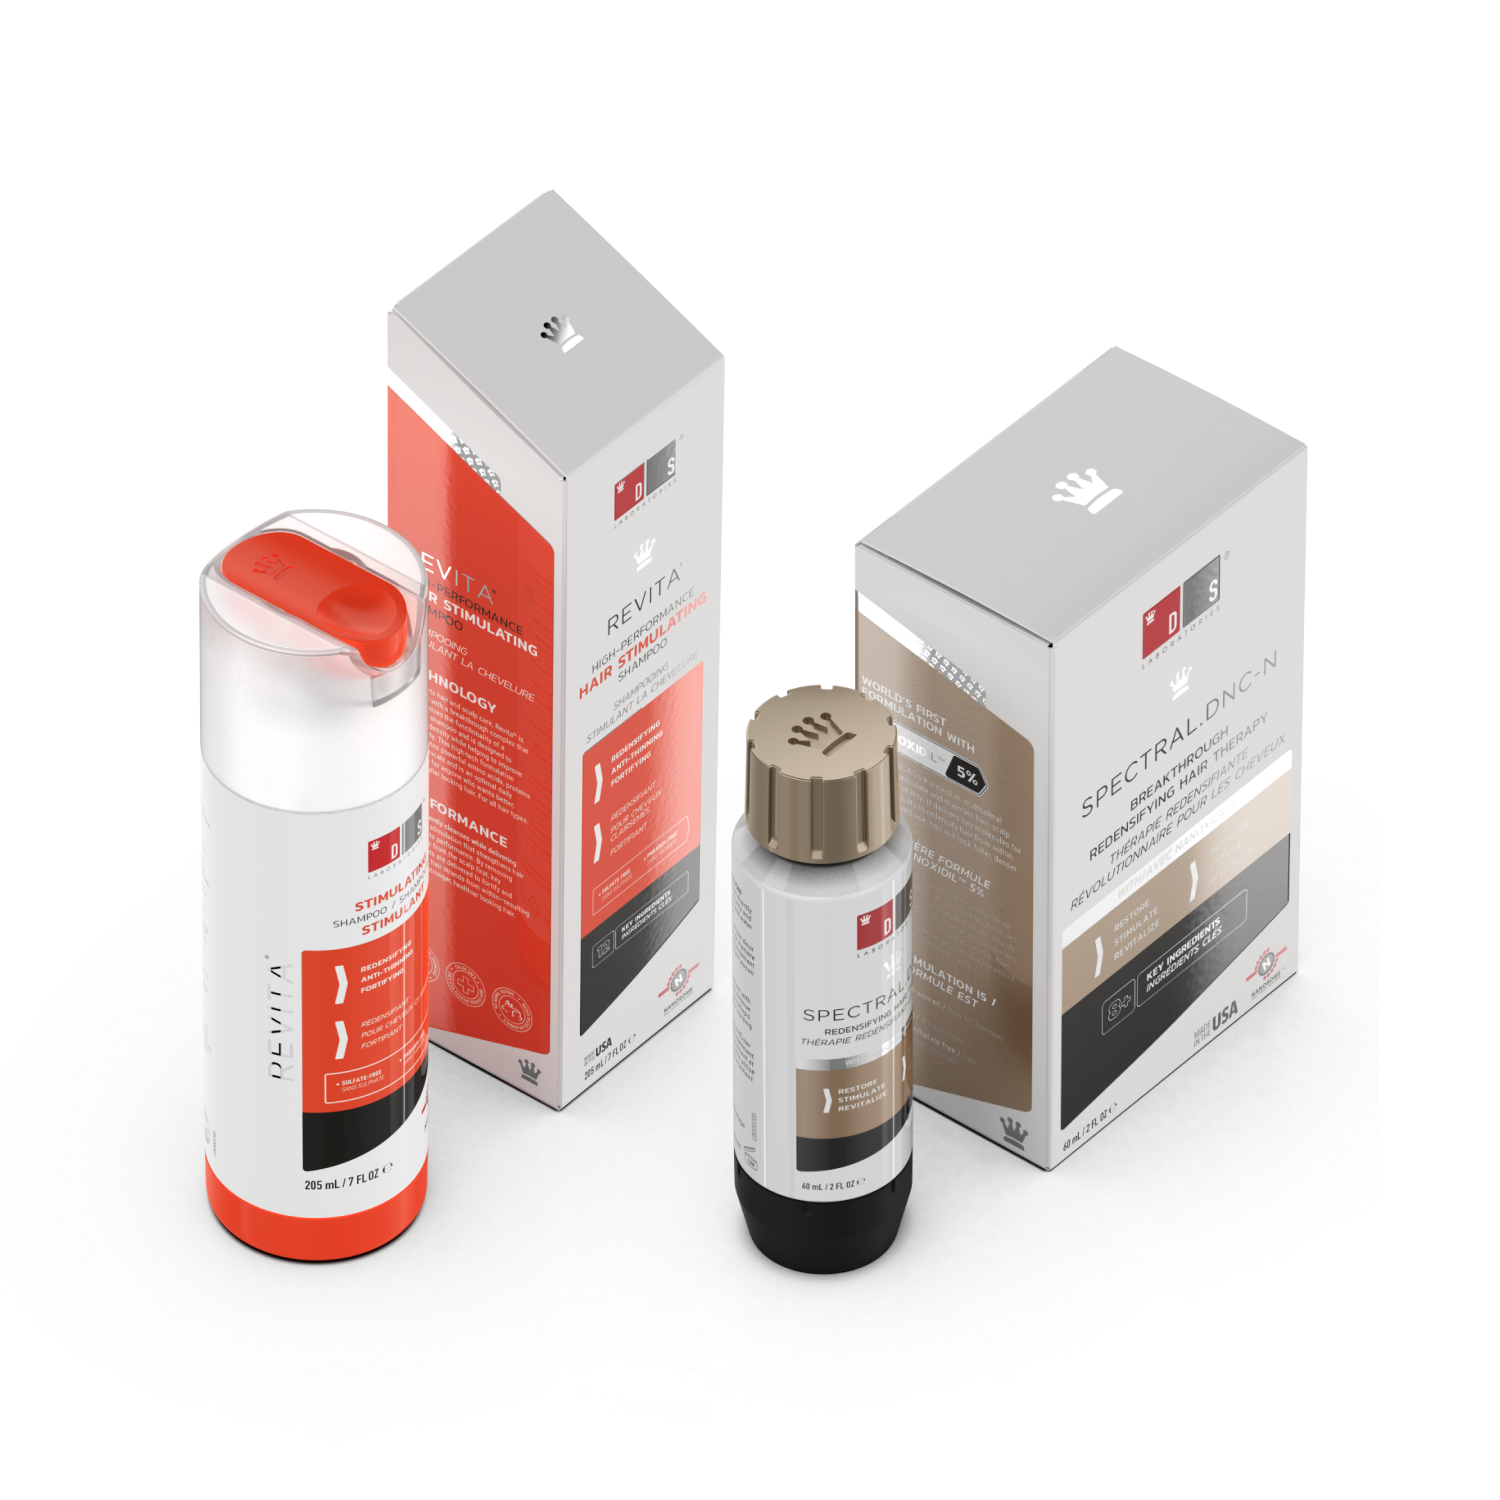 Thinning Crown Support Kit | Revita Shampoo + Spectral.DNC-N